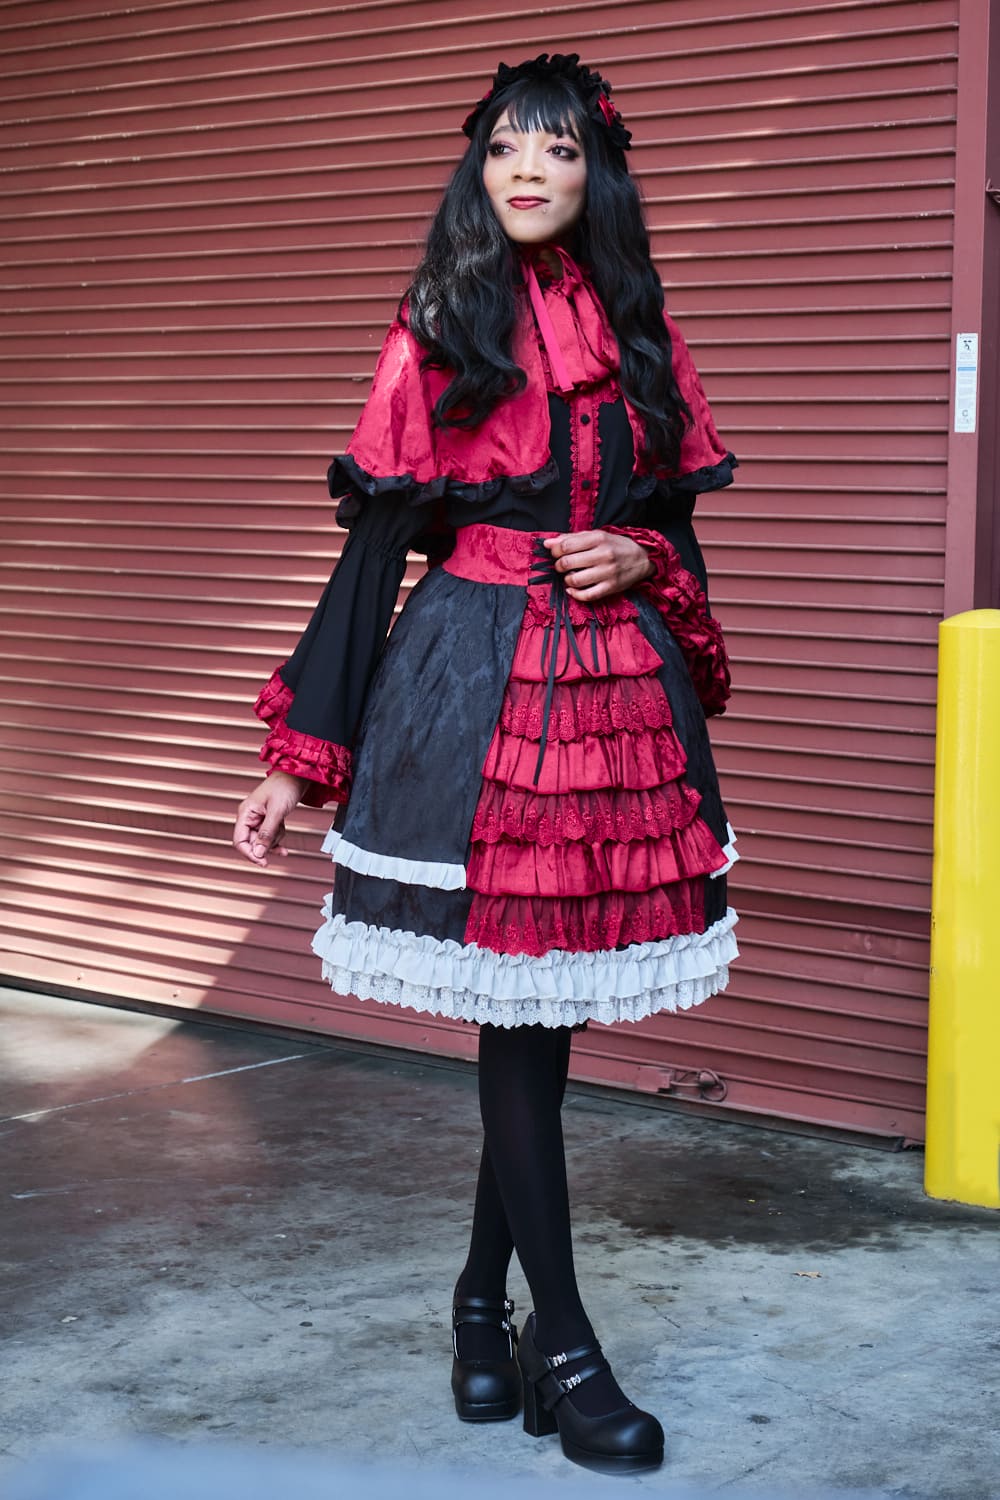 Atelier Pierrot gothic lolita model wearing black, red, and white collaboration set of a capelet, blouse, and skirt set - full body standing pose 4.